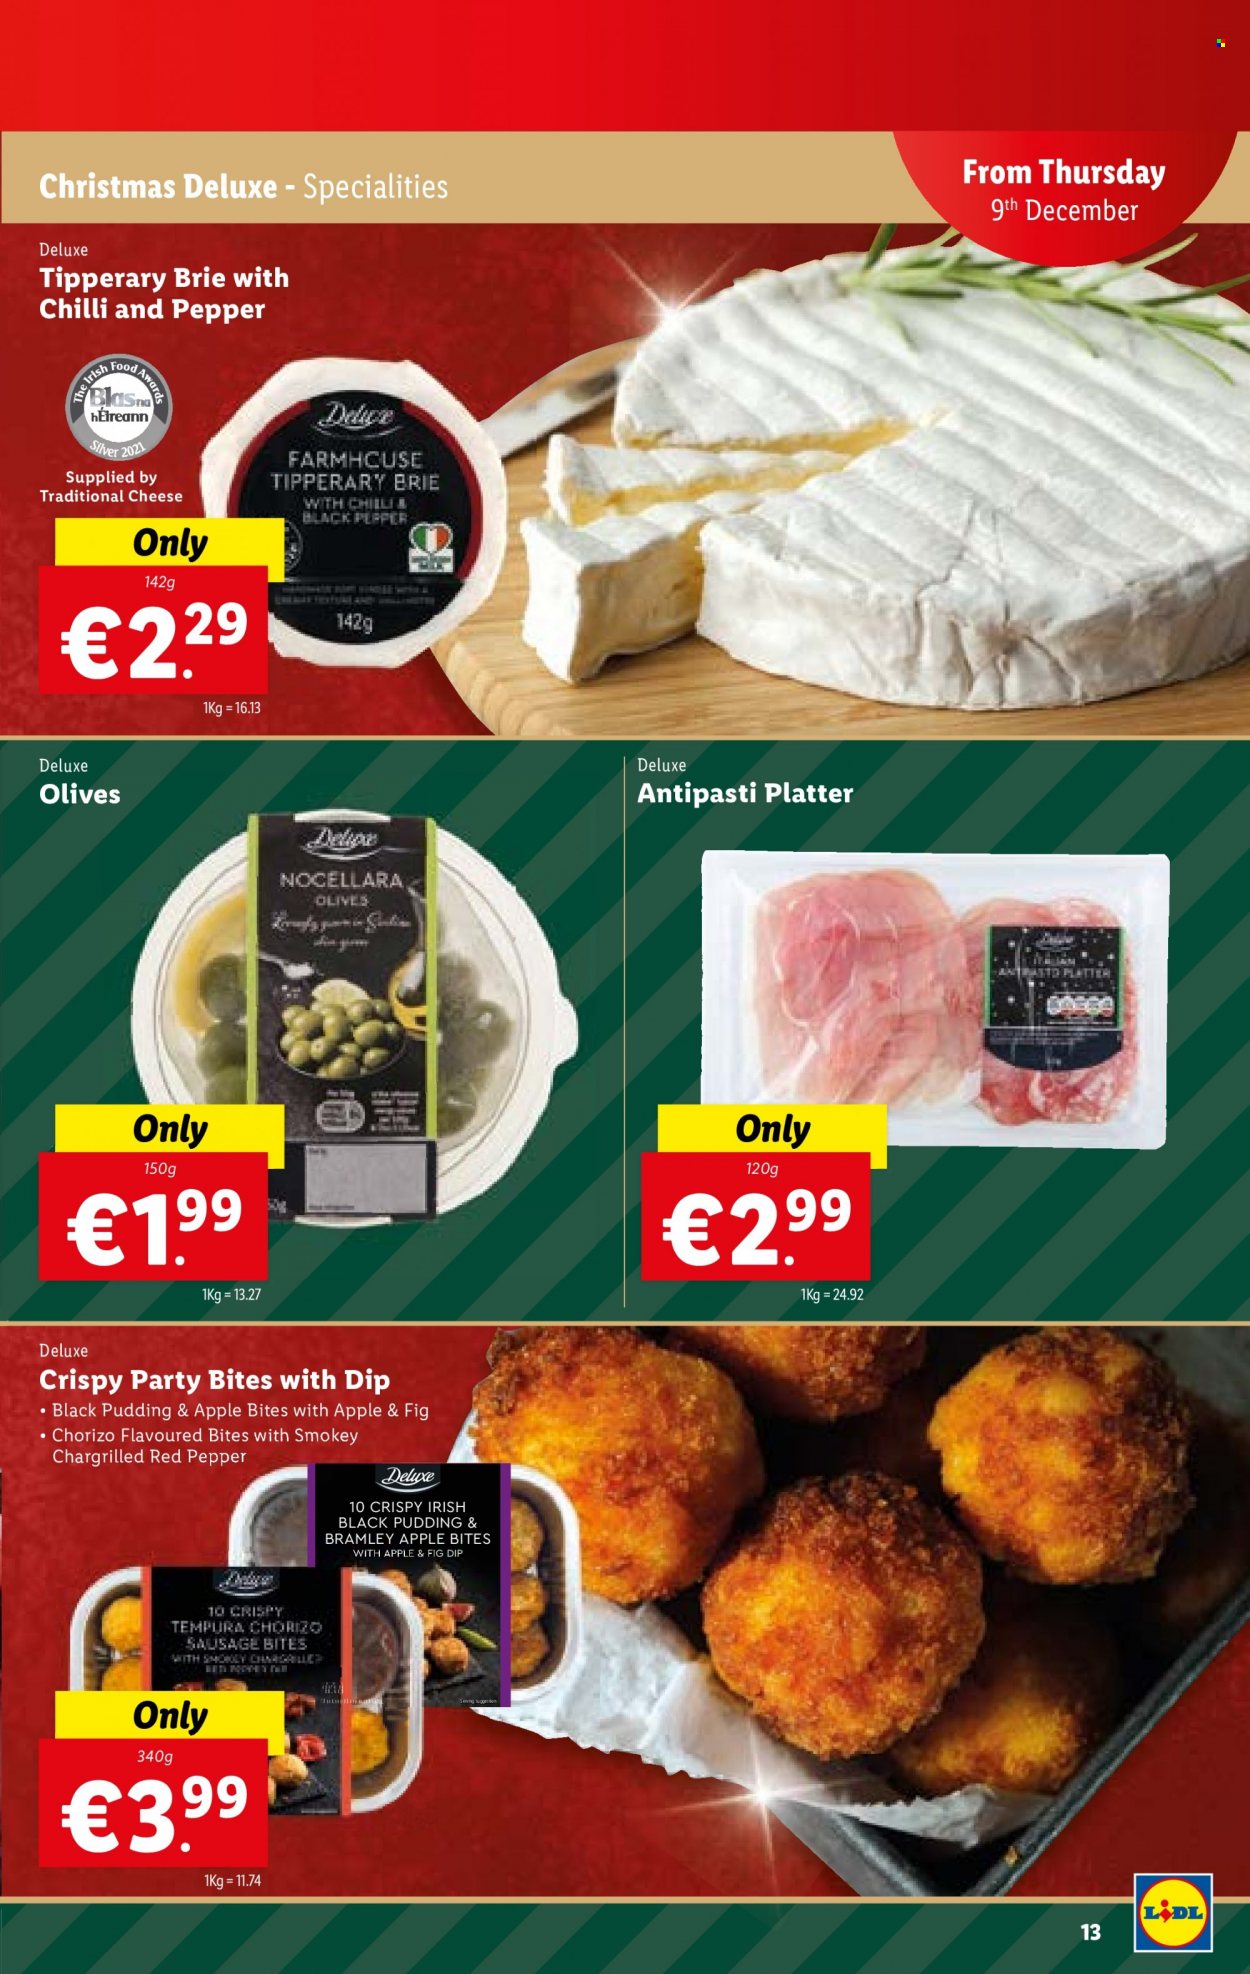 thumbnail - Lidl offer  - 09.12.2021 - 15.12.2021 - Sales products - rusks, ginger, figs, bacon, chorizo, black pudding, cheese, brie, yeast, flour, rice flour, starch, sugar, wheat flour, oatmeal, salt, olives, cereals, cloves, spice, onion powder, cinnamon, mustard, chutney, sunflower oil, vinegar, wine vinegar, raisins, dried fruit, dried figs, wine, lid, baking tray, foil tray, plant seeds, Optimum, oven, microwave, calcium. Page 13.